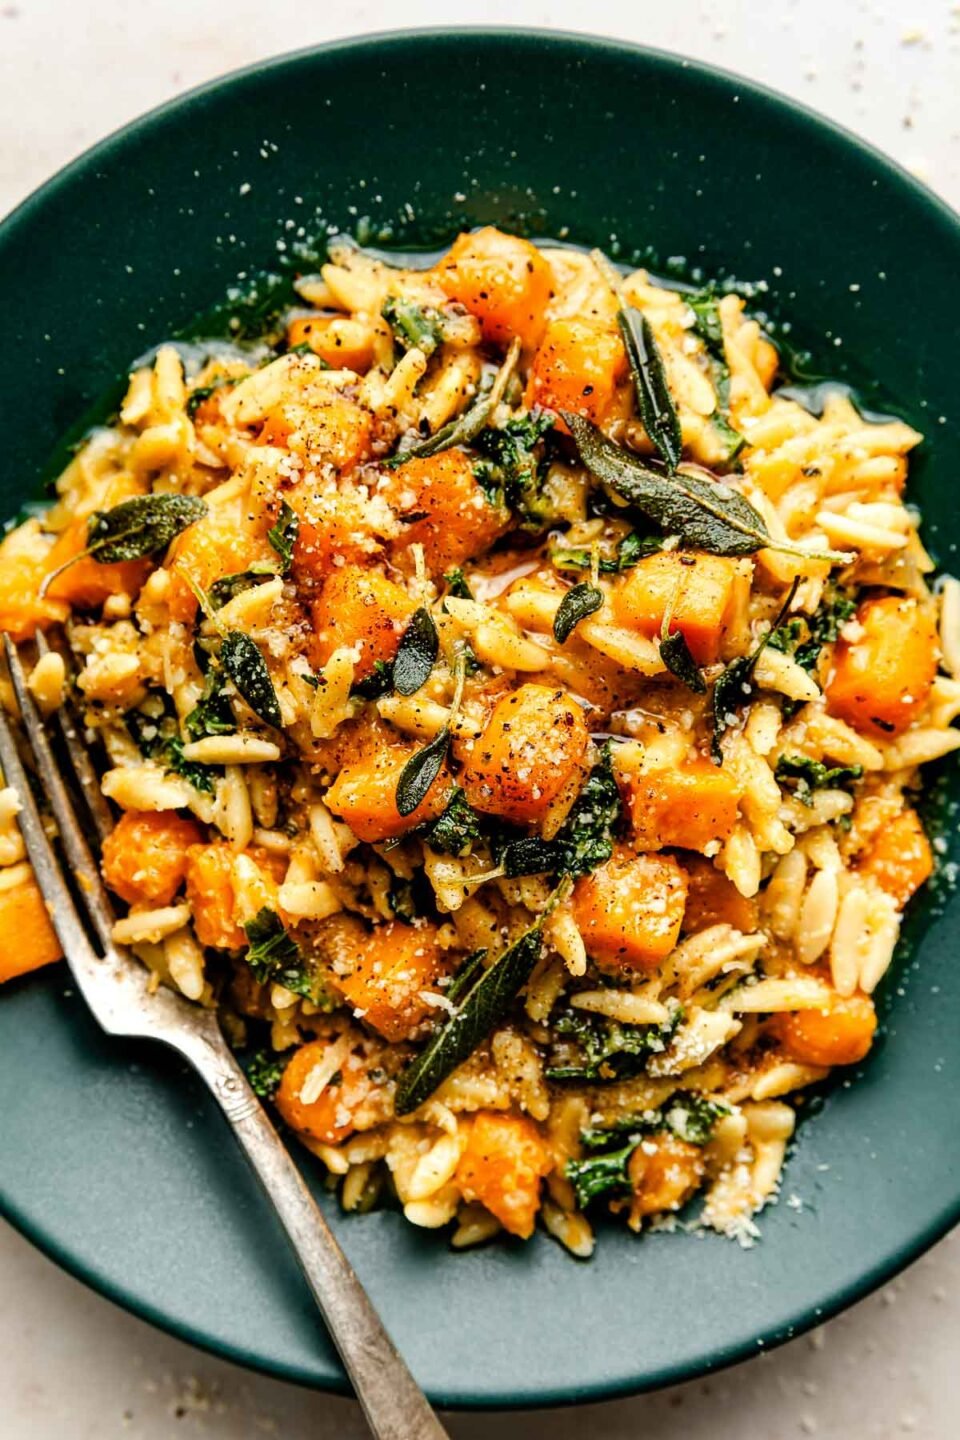 An overhead shot of a serving of butternut squash orzo topped with grated parmesan in a dark green shallow bowl atop an off-white surface.